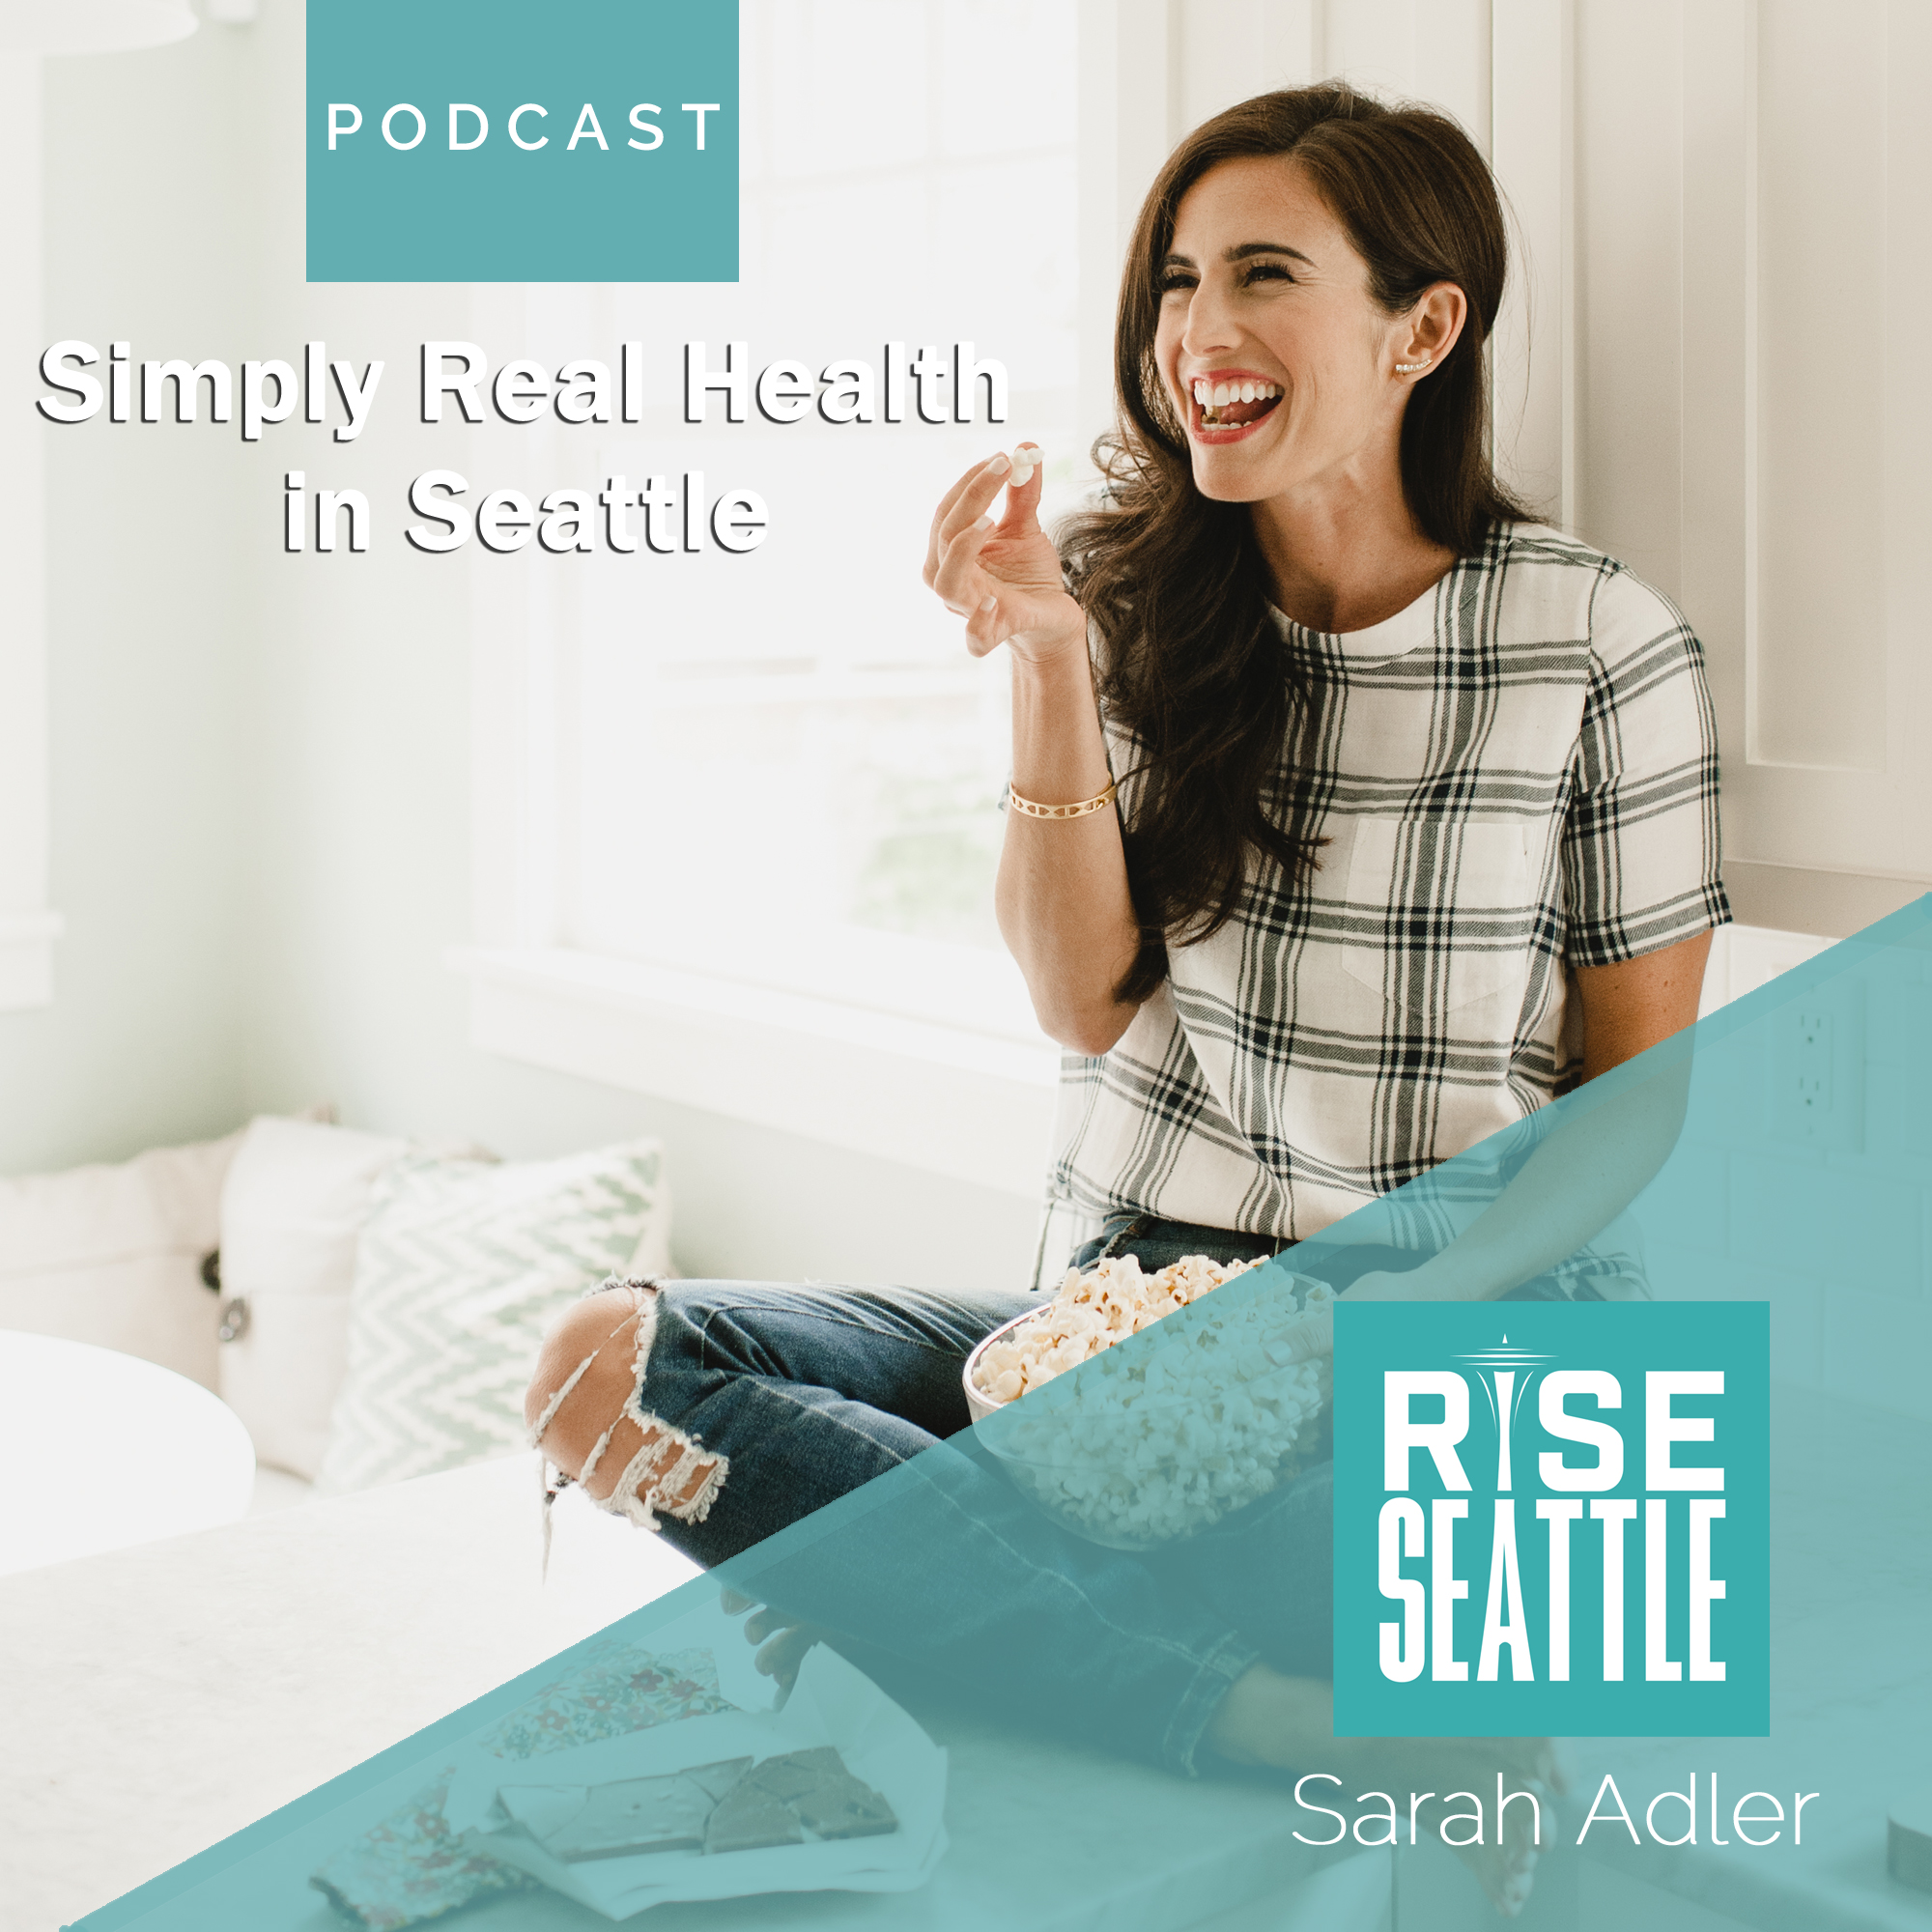 S1.E5. Sarah Adler: Simply Real Health in Seattle